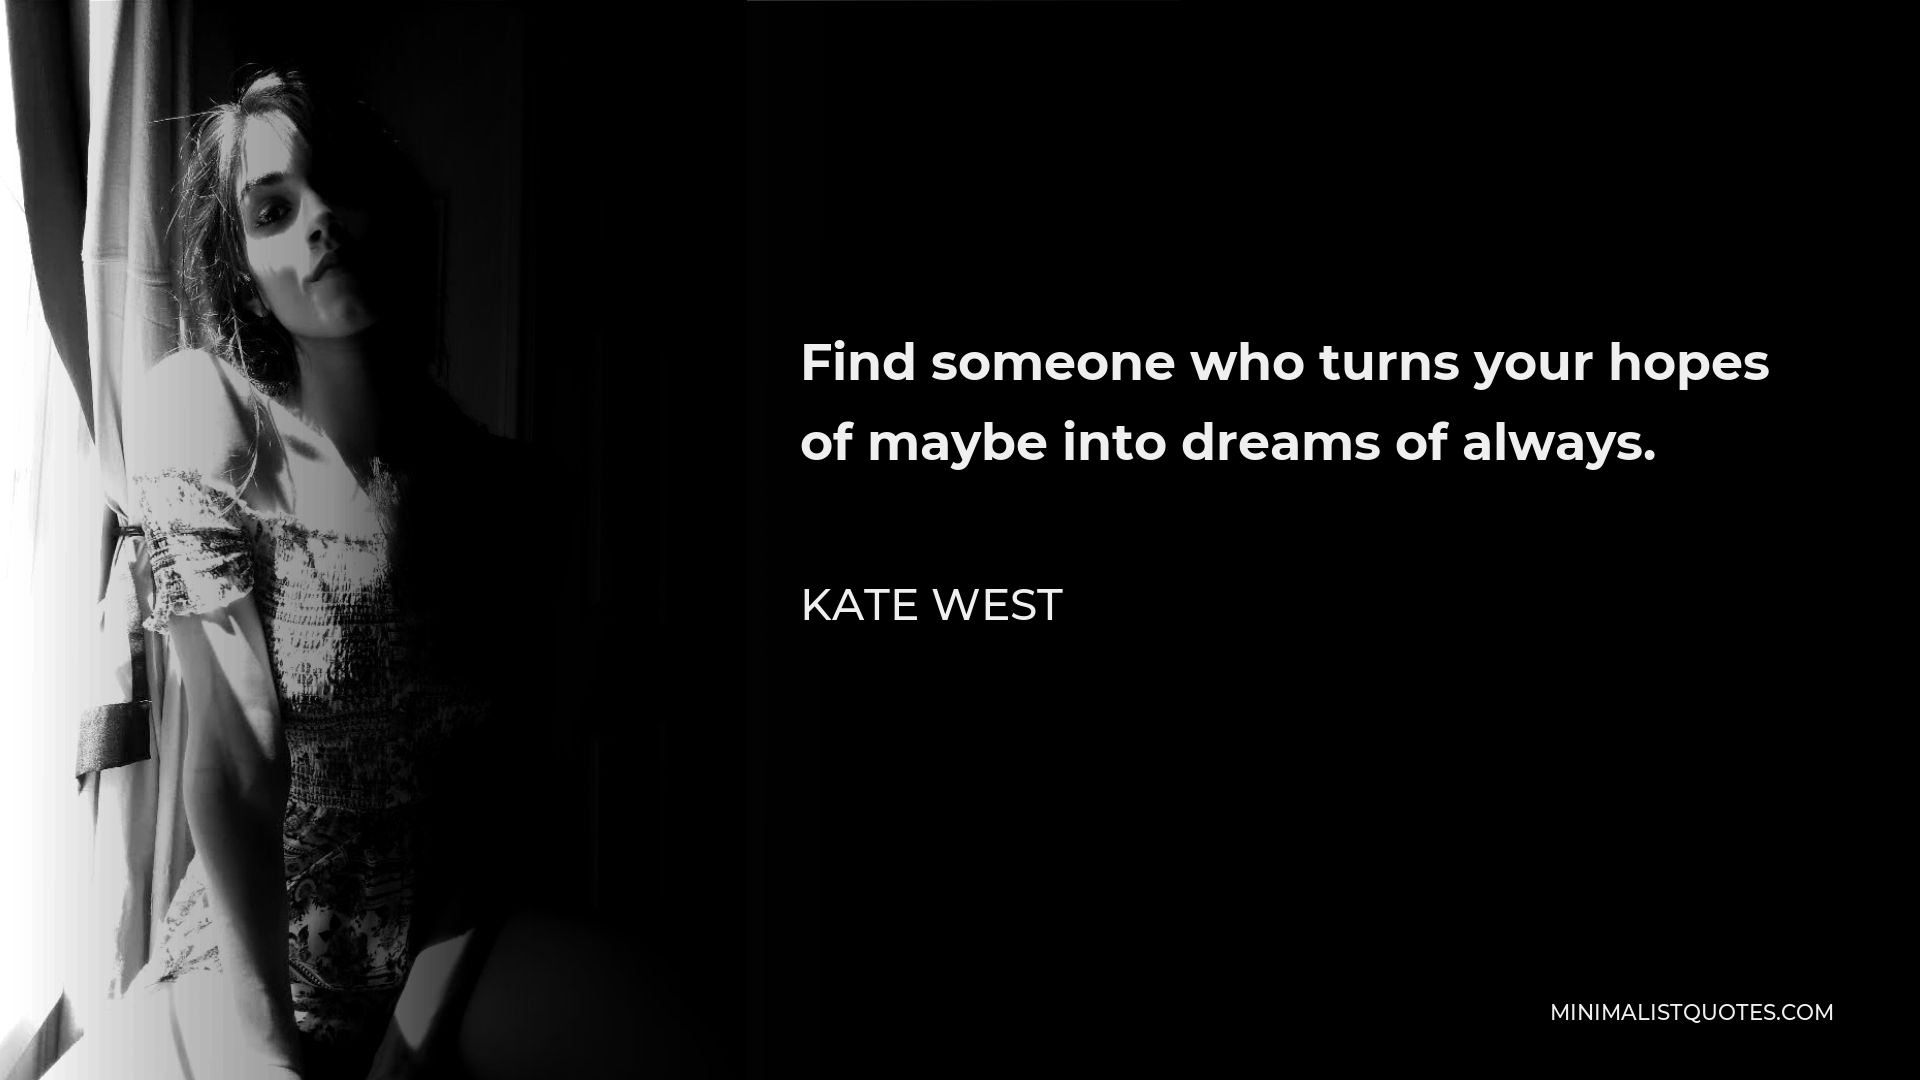 Kate West Quote - Find someone who turns your hopes of maybe into dreams of always.